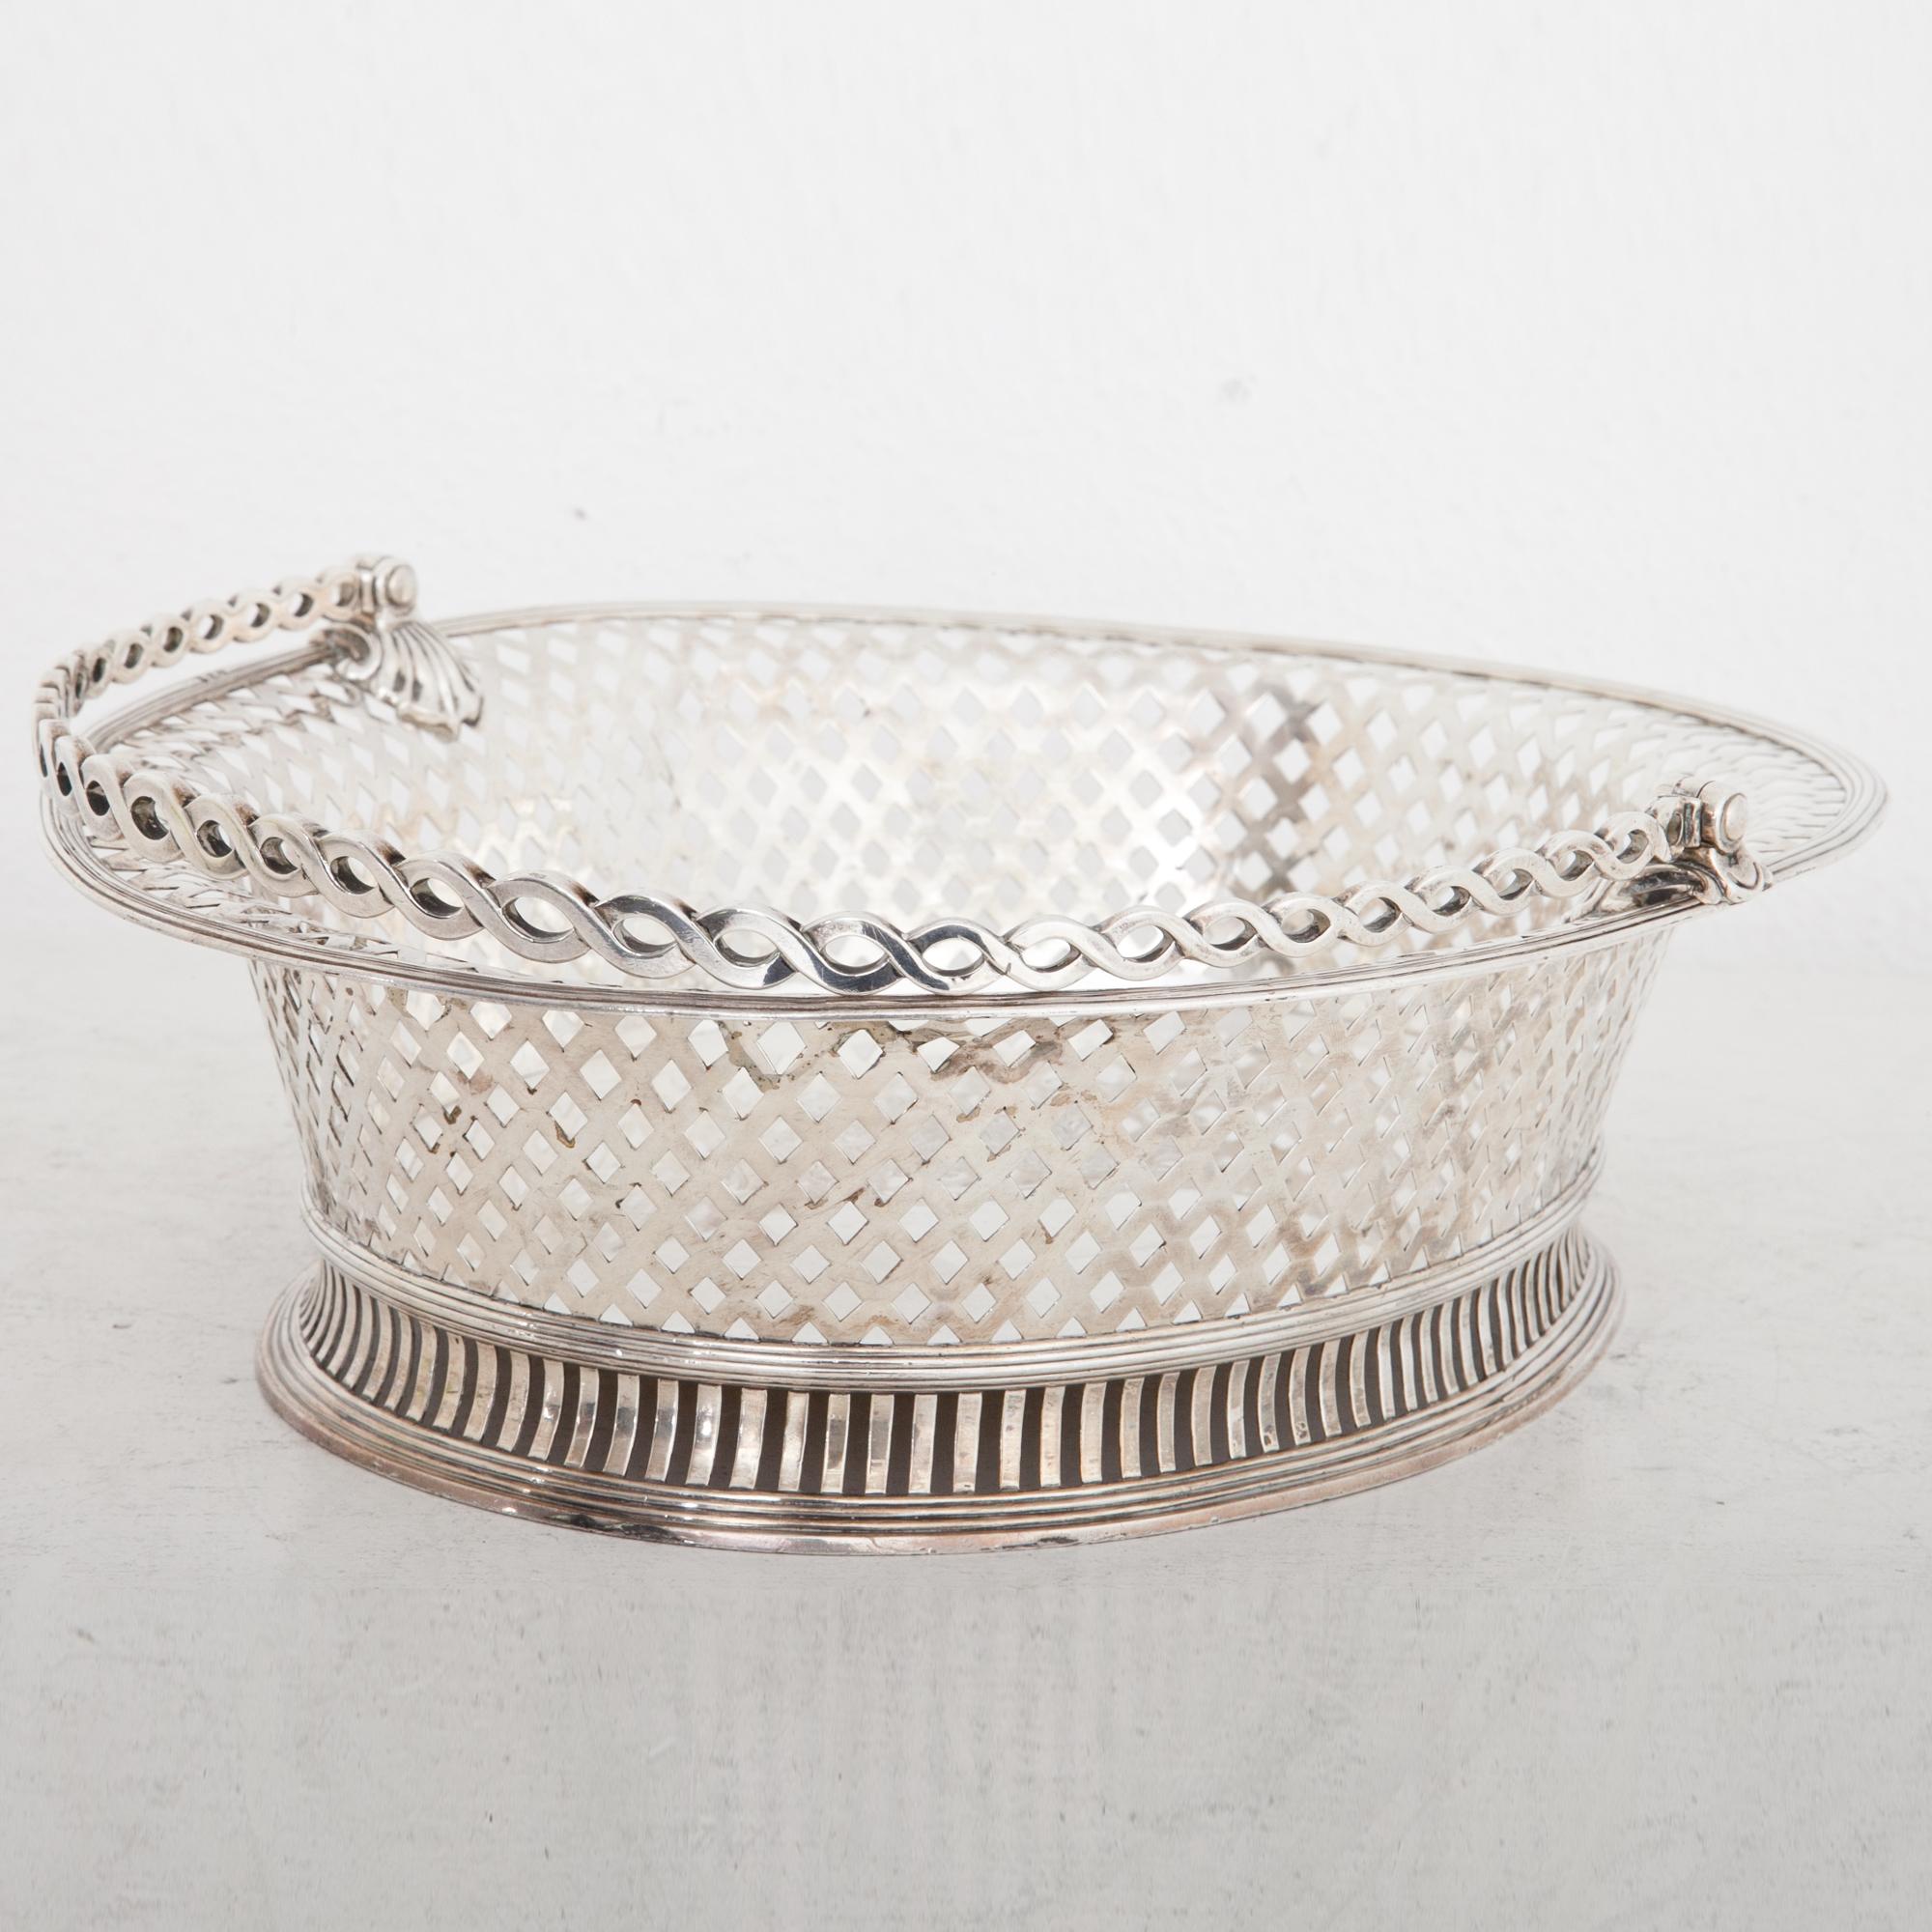 Oval silver basket with twisted handle and a pierced wall, staniong on a slightly broader stand with horizontal slats. The well shows a crowned coat of arms with a winged lion and a mounting horse as shield carries as well as a banner with the motto